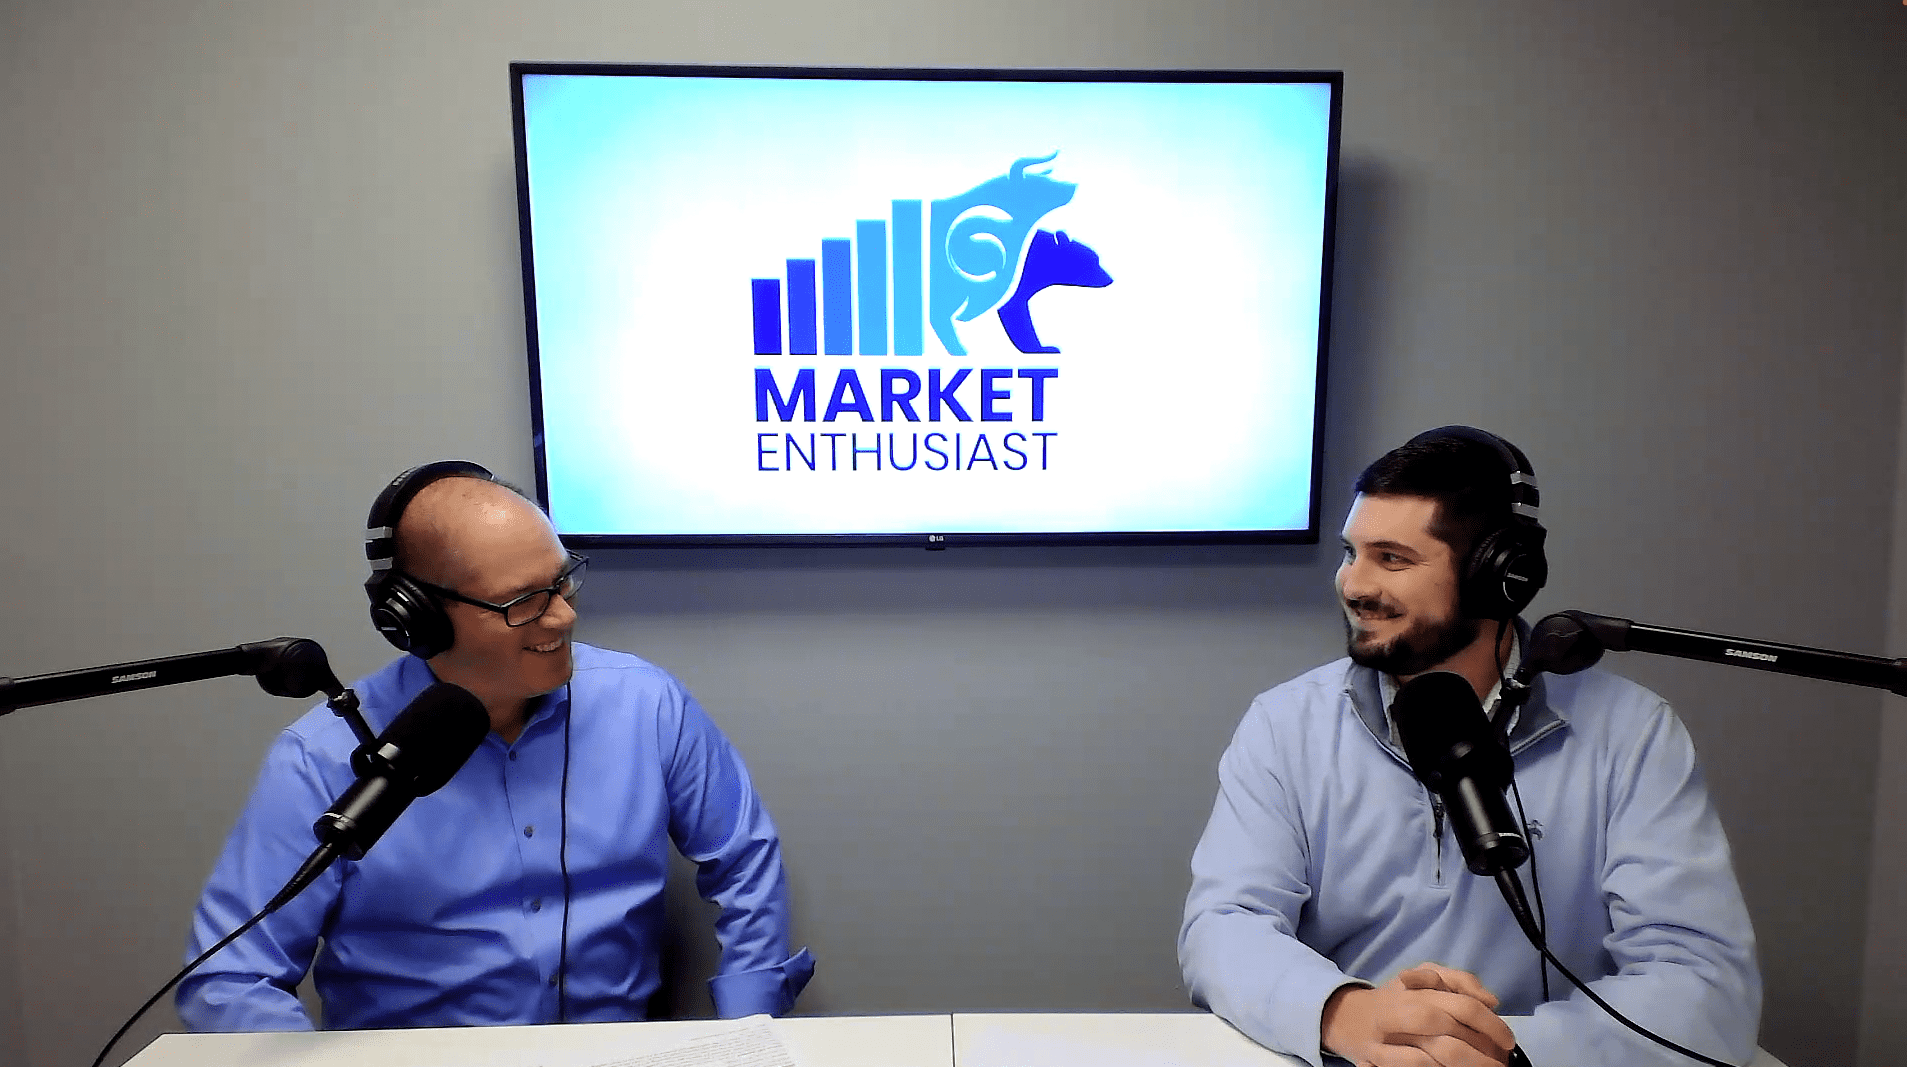 Chris Needs and Noah Brooks talk all things market during a recording of their podcast